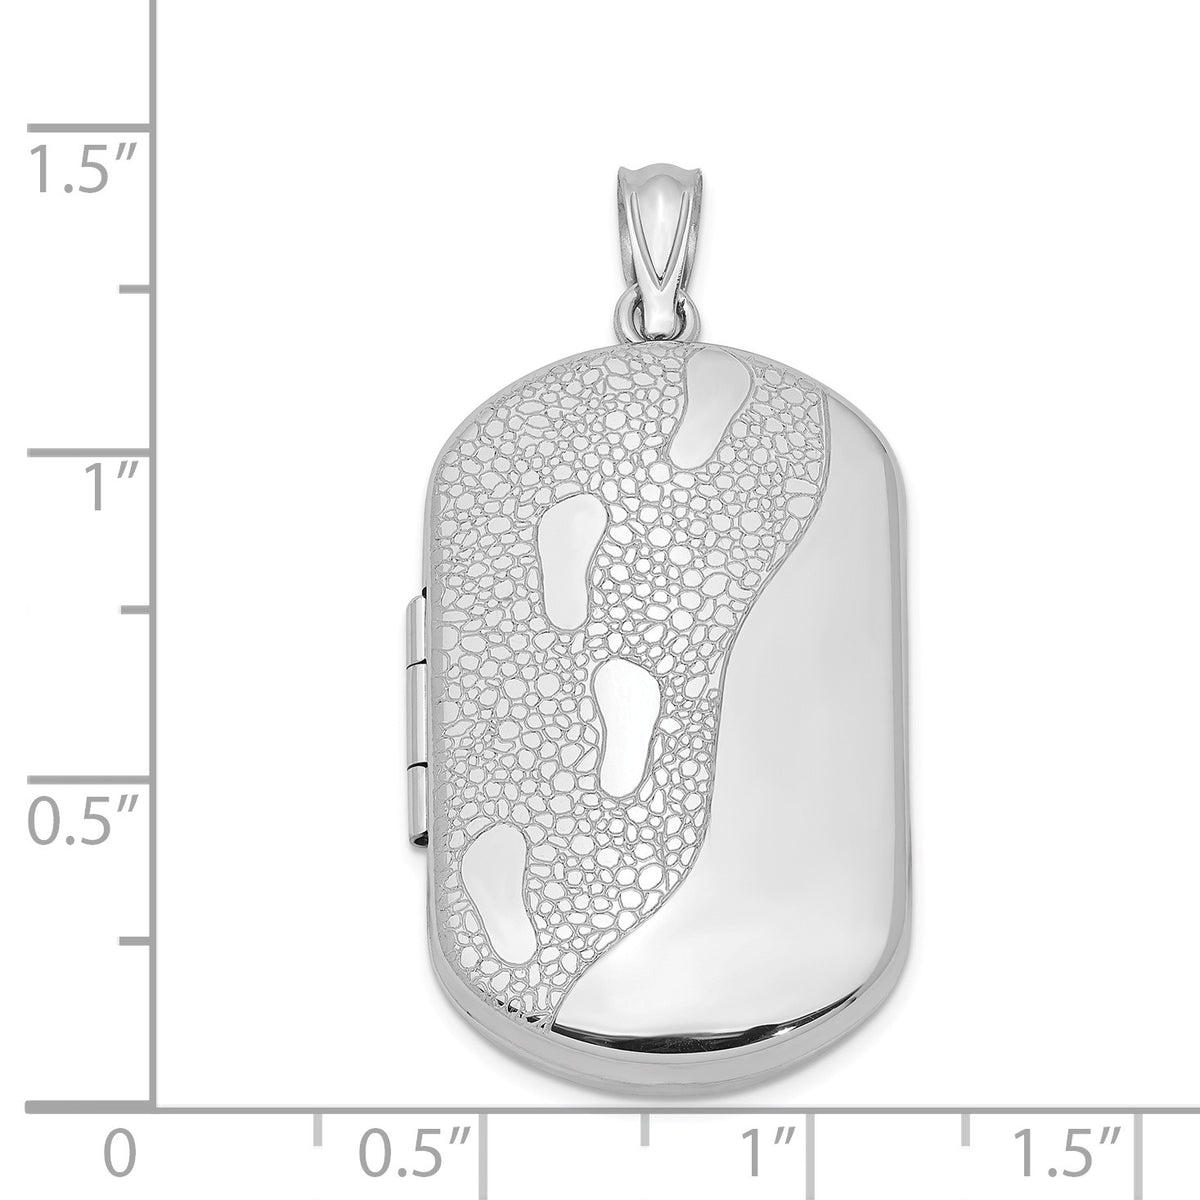 Alternate view of the Sterling Silver 30mm Footprints Rectangular Locket by The Black Bow Jewelry Co.